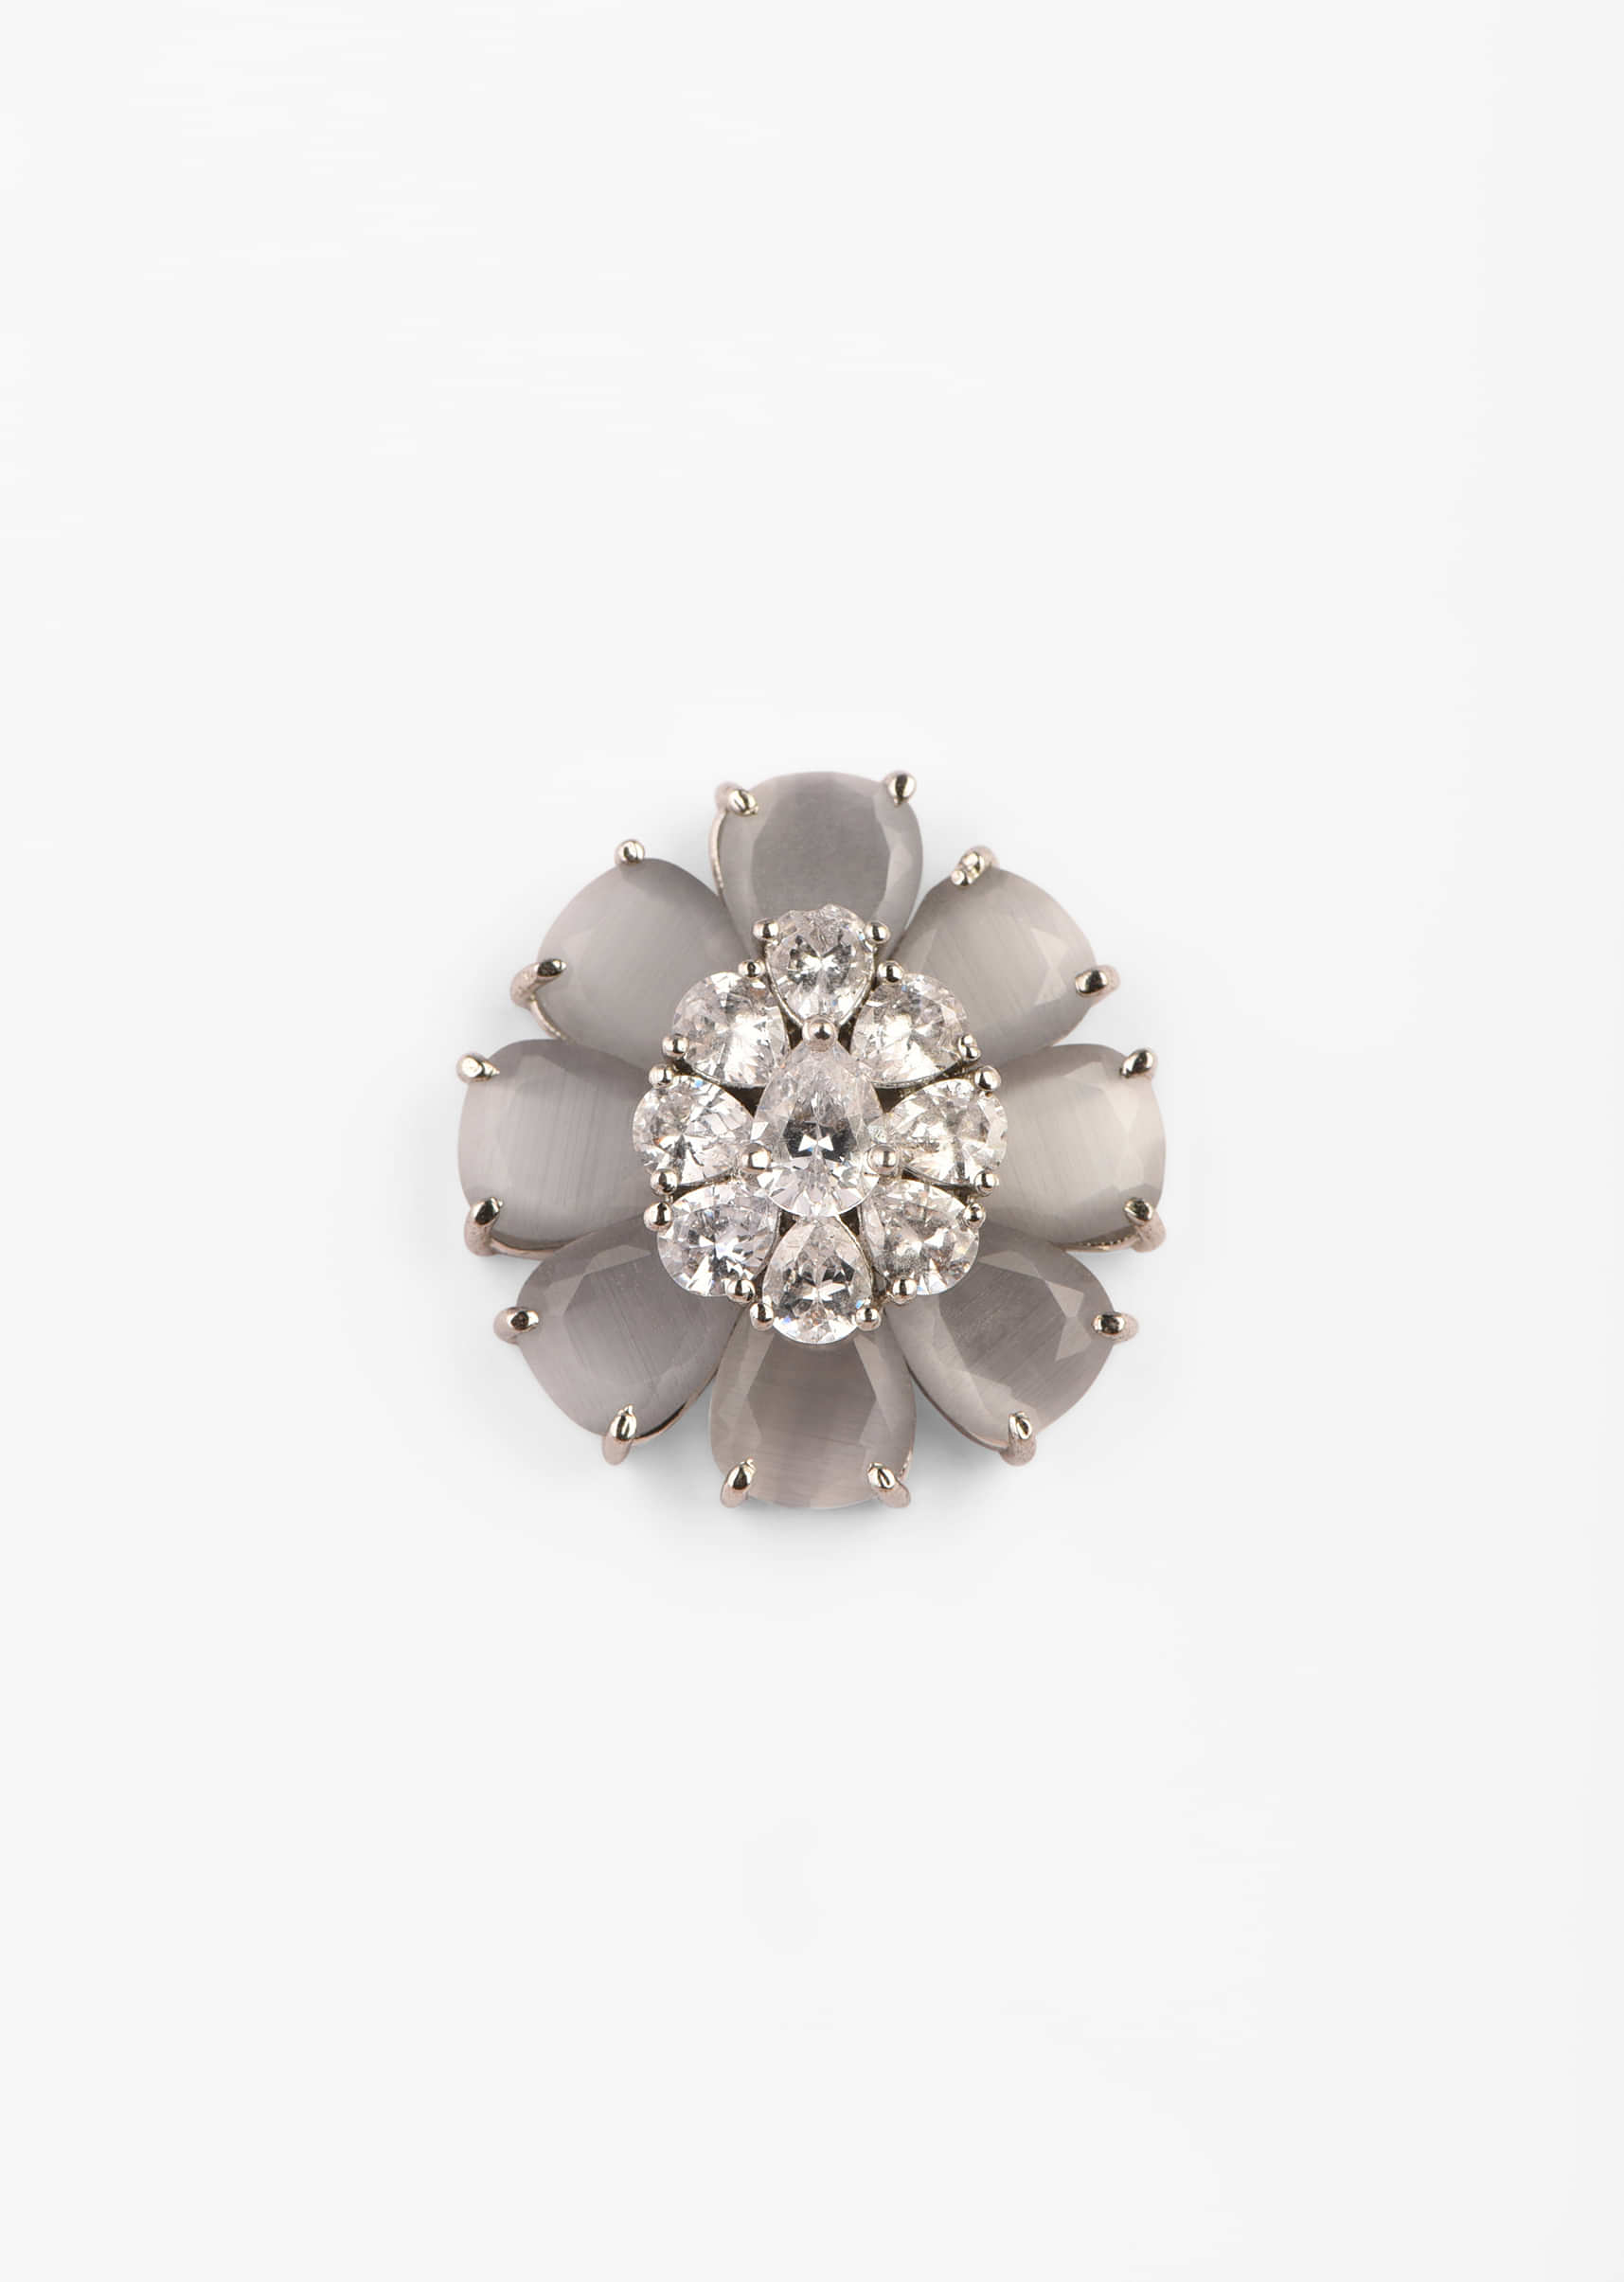 Grey Stone Studded Floral Stud Earrings With Swarovski In The Centre 